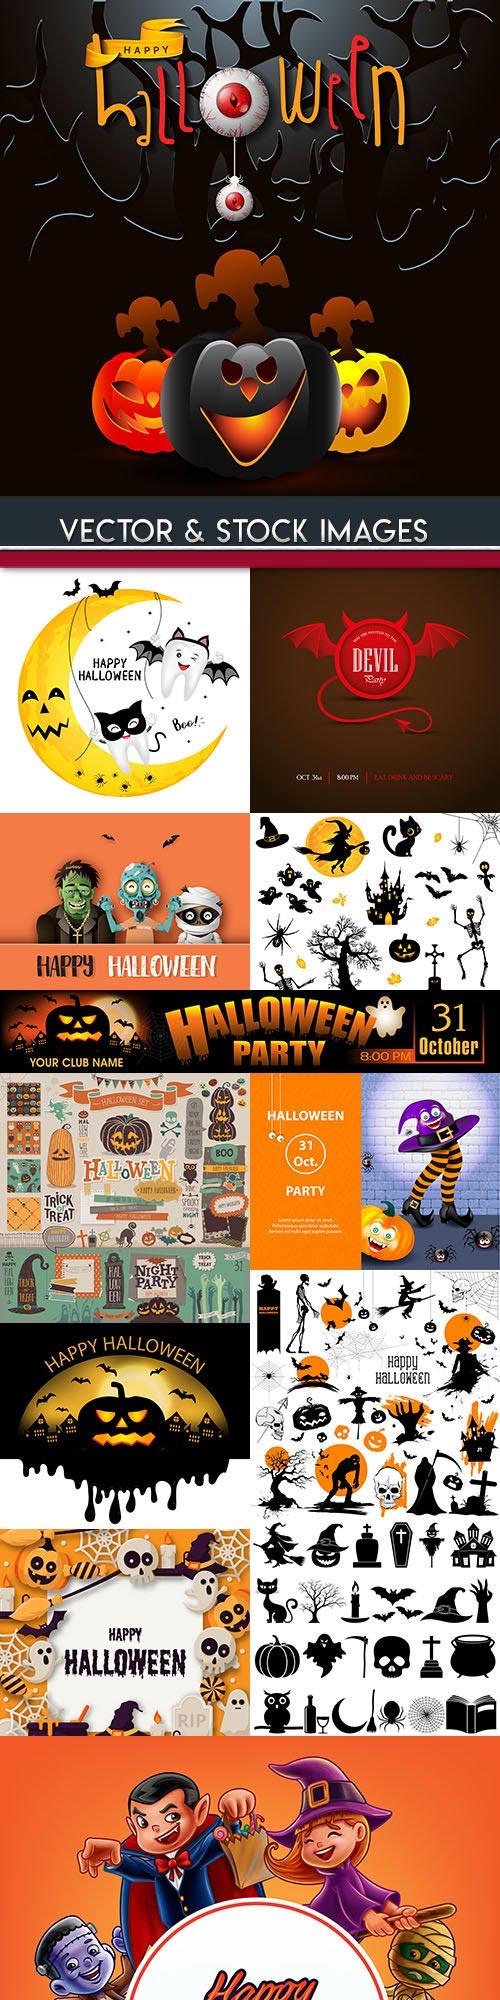 Happy Halloween holiday illustration collection 39